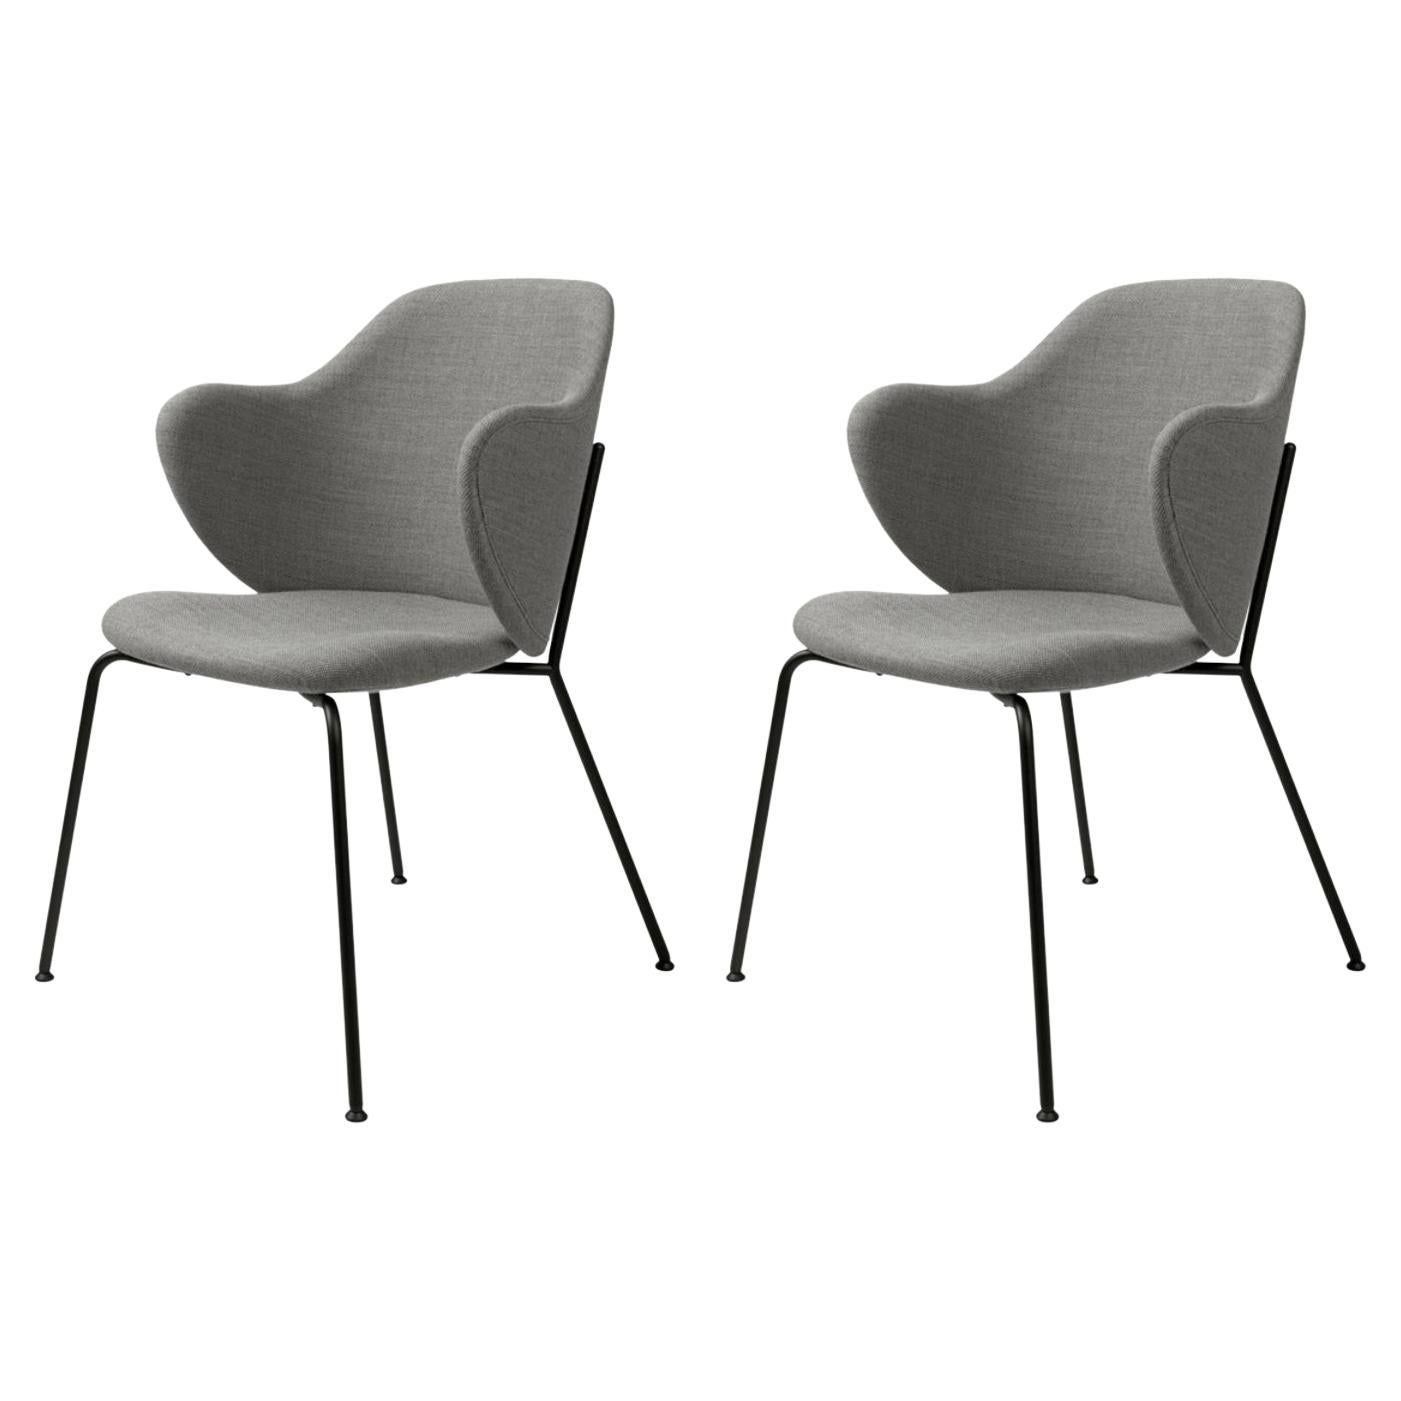 Set of 2 Grey Fiord Lassen Chairs by Lassen For Sale